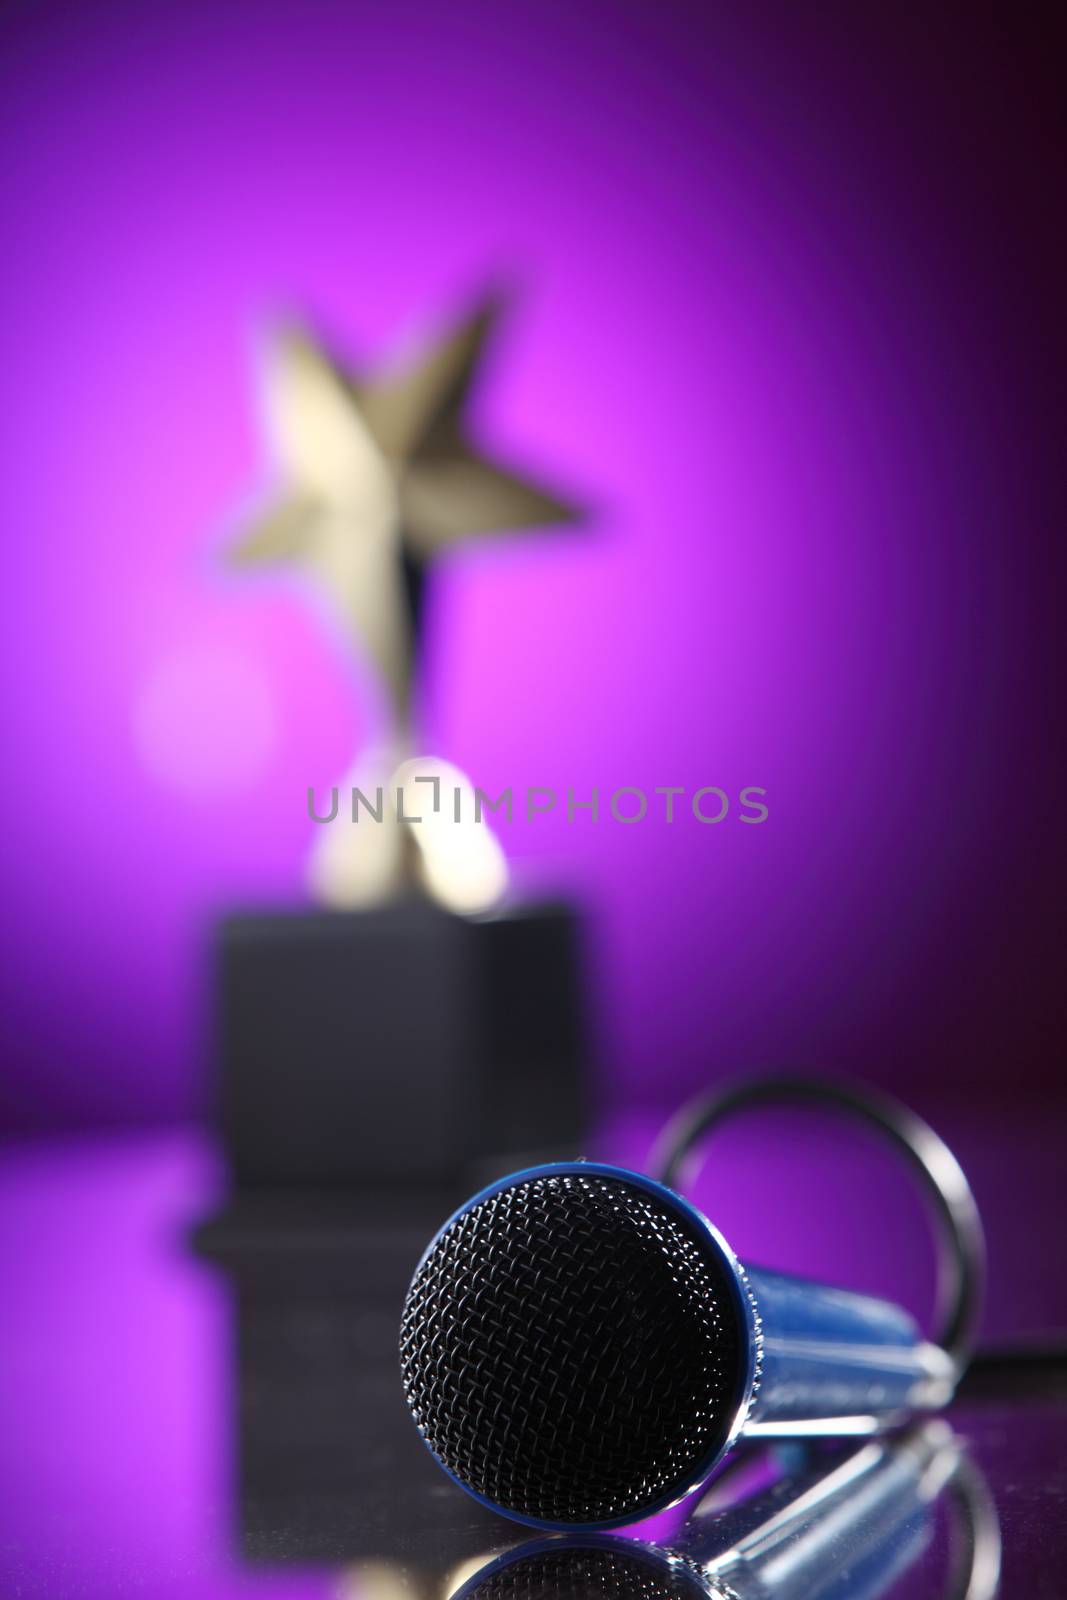 star shape trophy and microphone